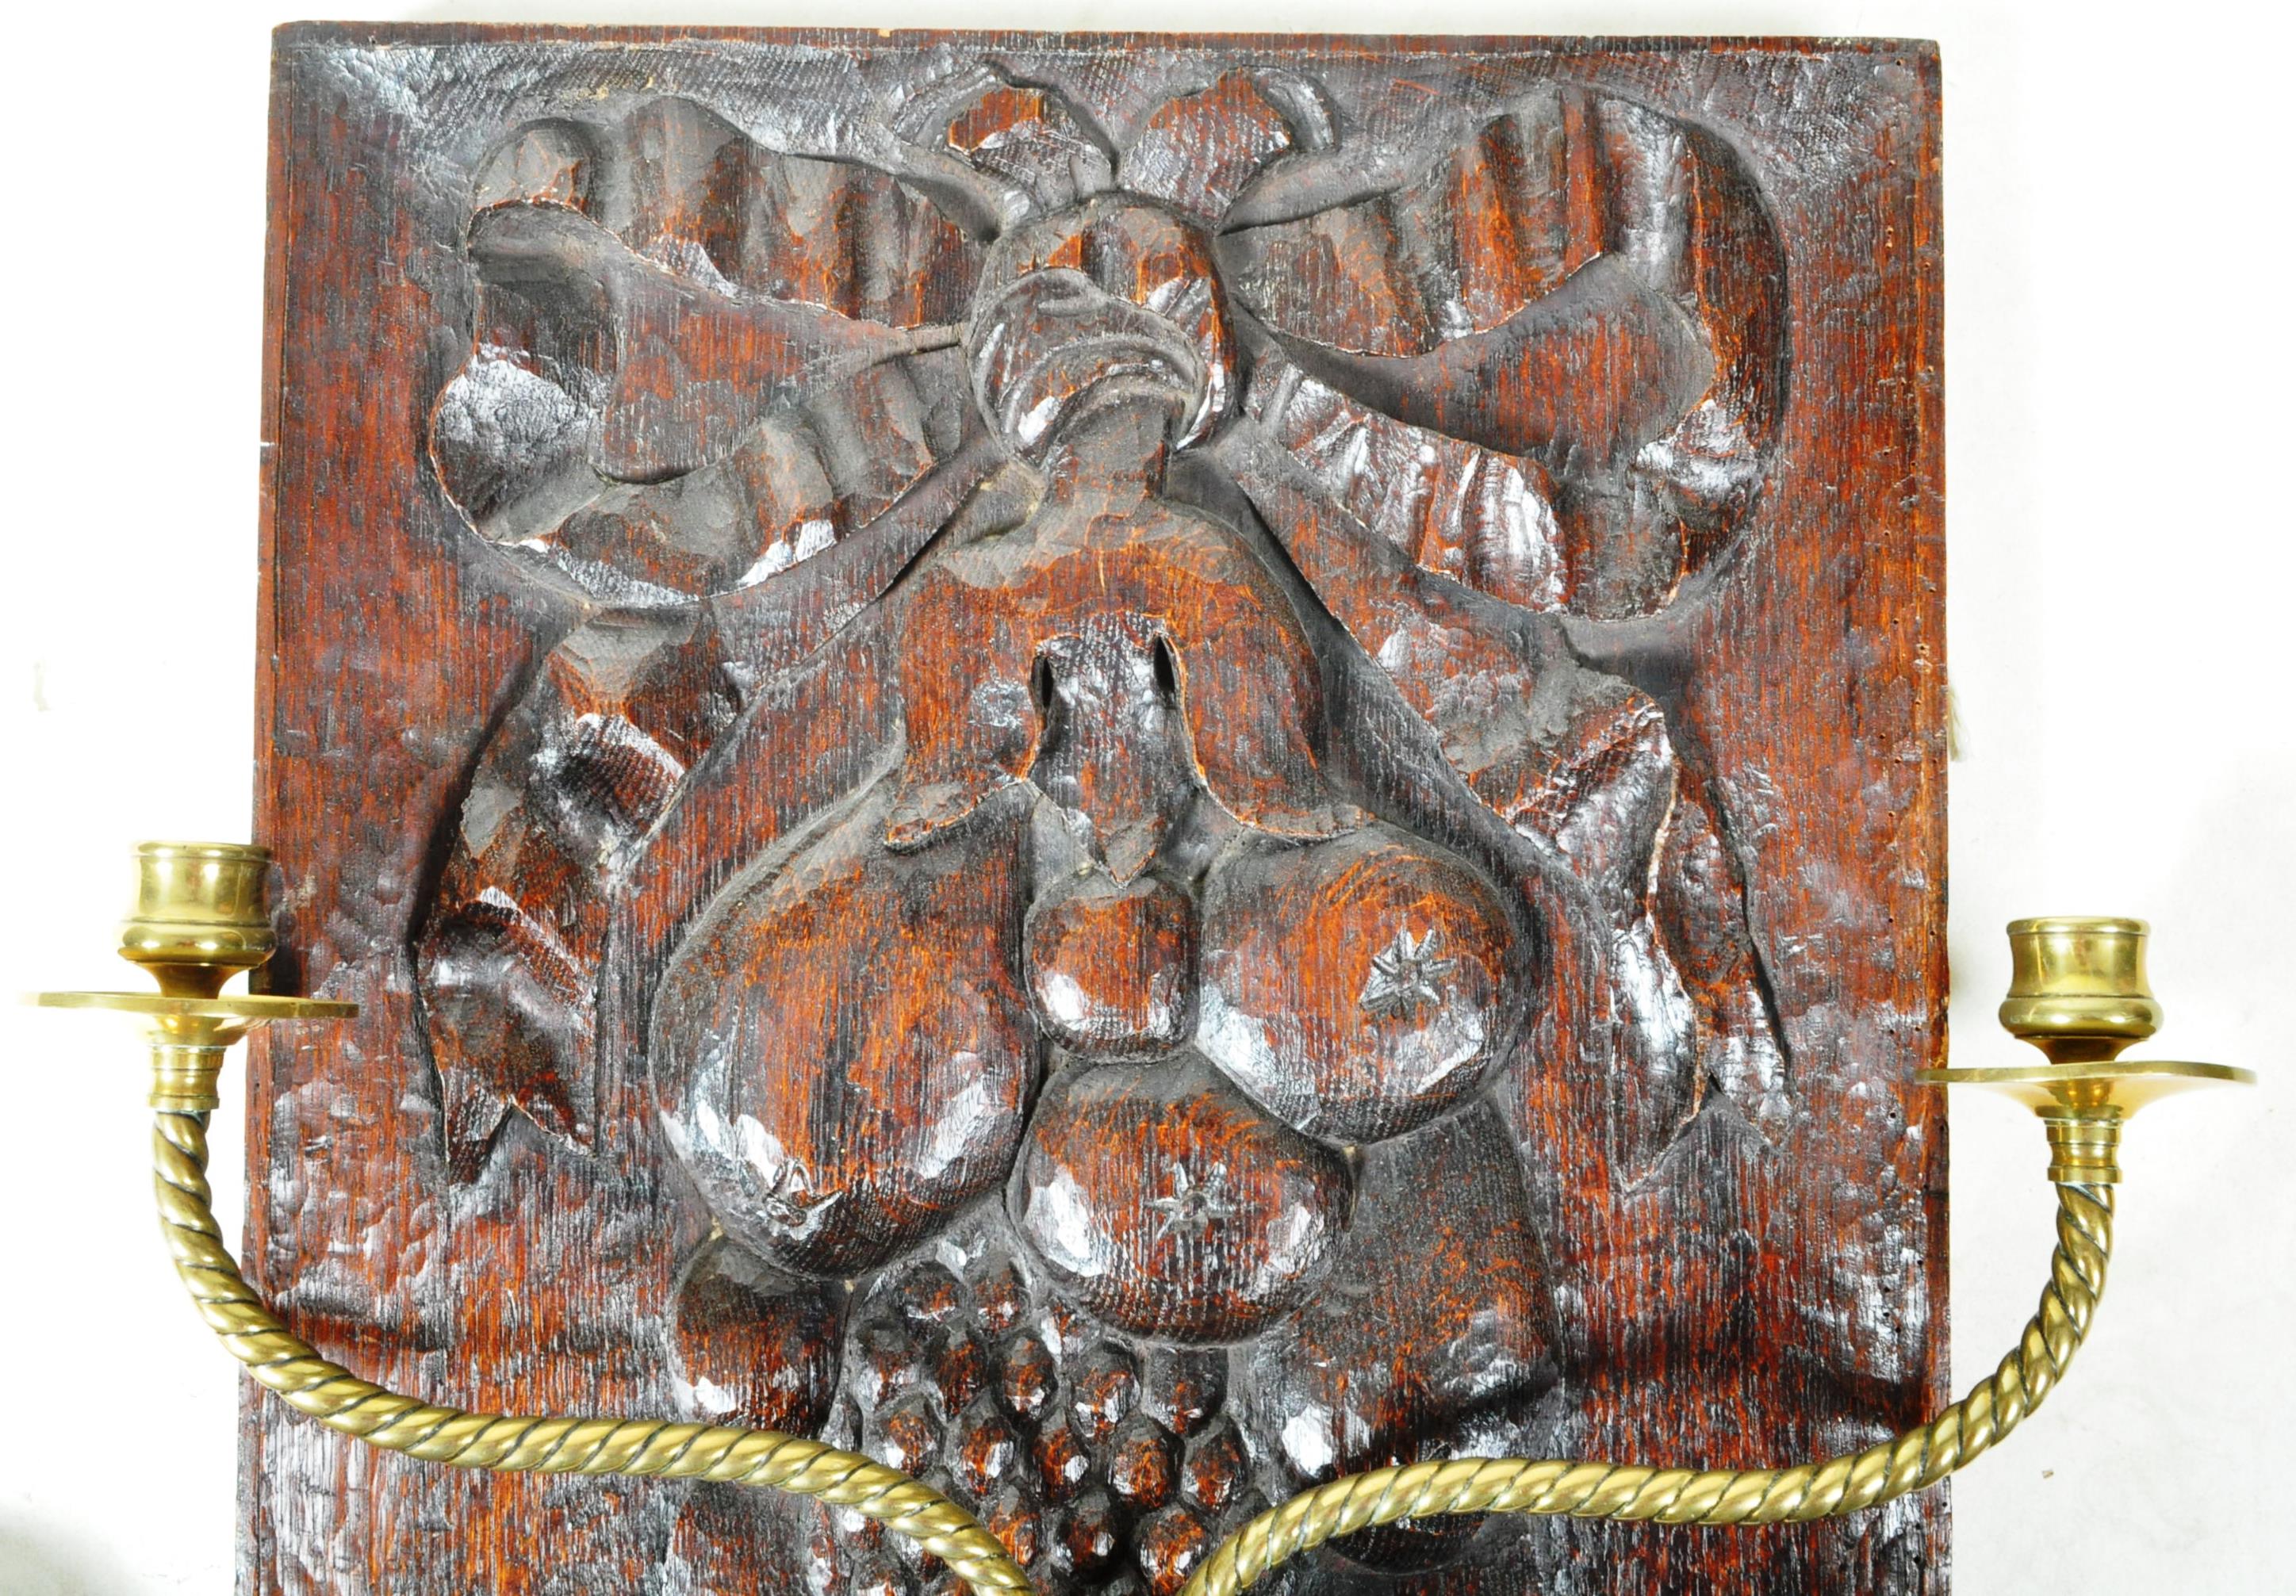 19TH CENTURY CARVED WOODEN PANEL WITH BRASS CANDLE SCONCES - Image 4 of 5